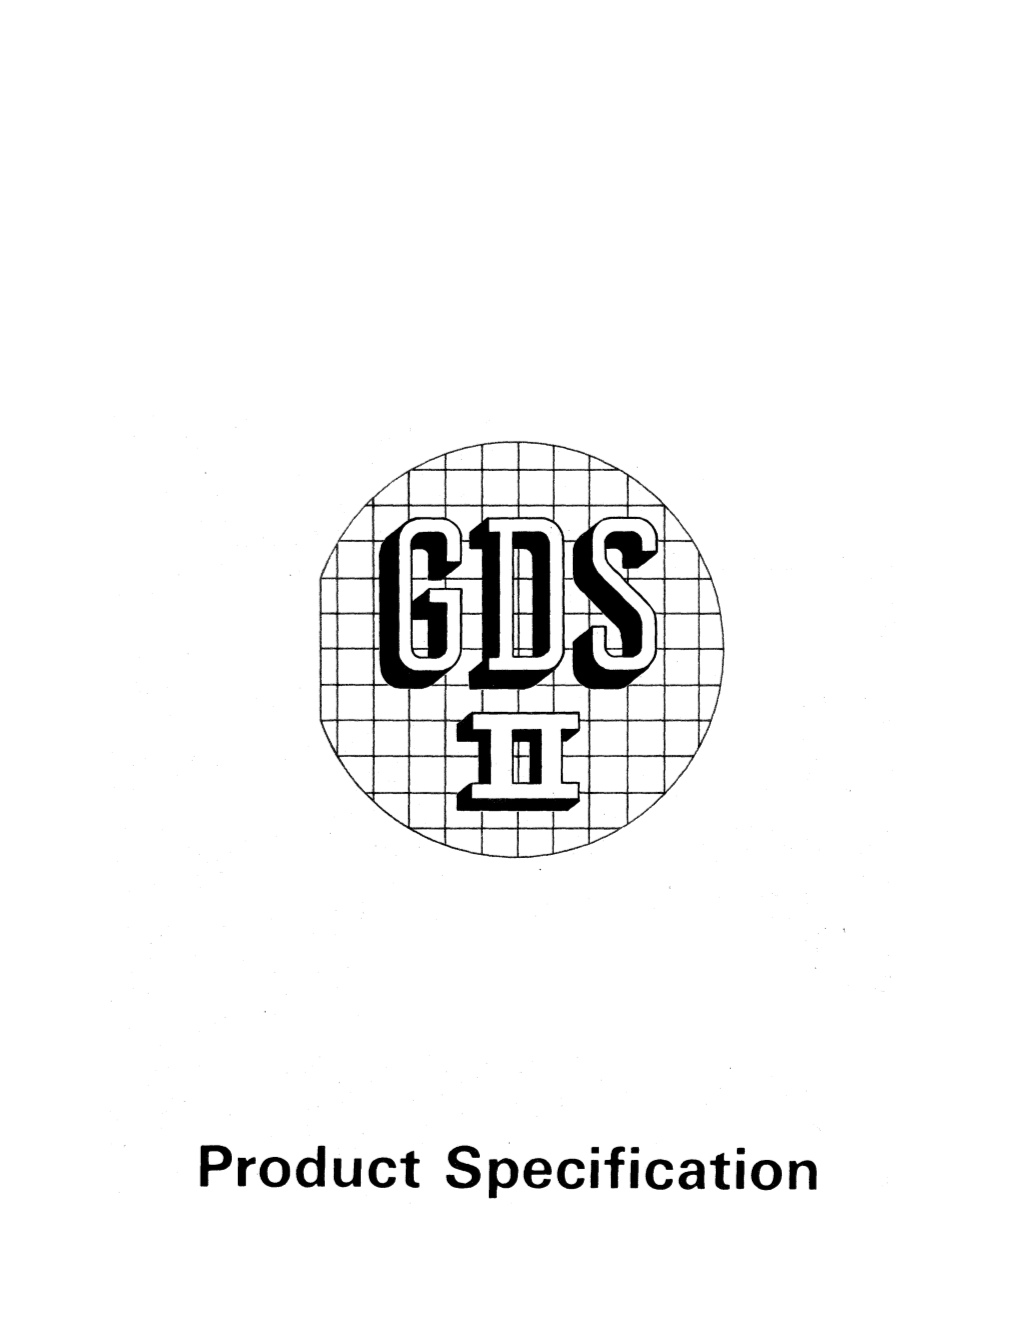 Product Specification DRAFT APR 1 31919 TABLE of CONTENTS